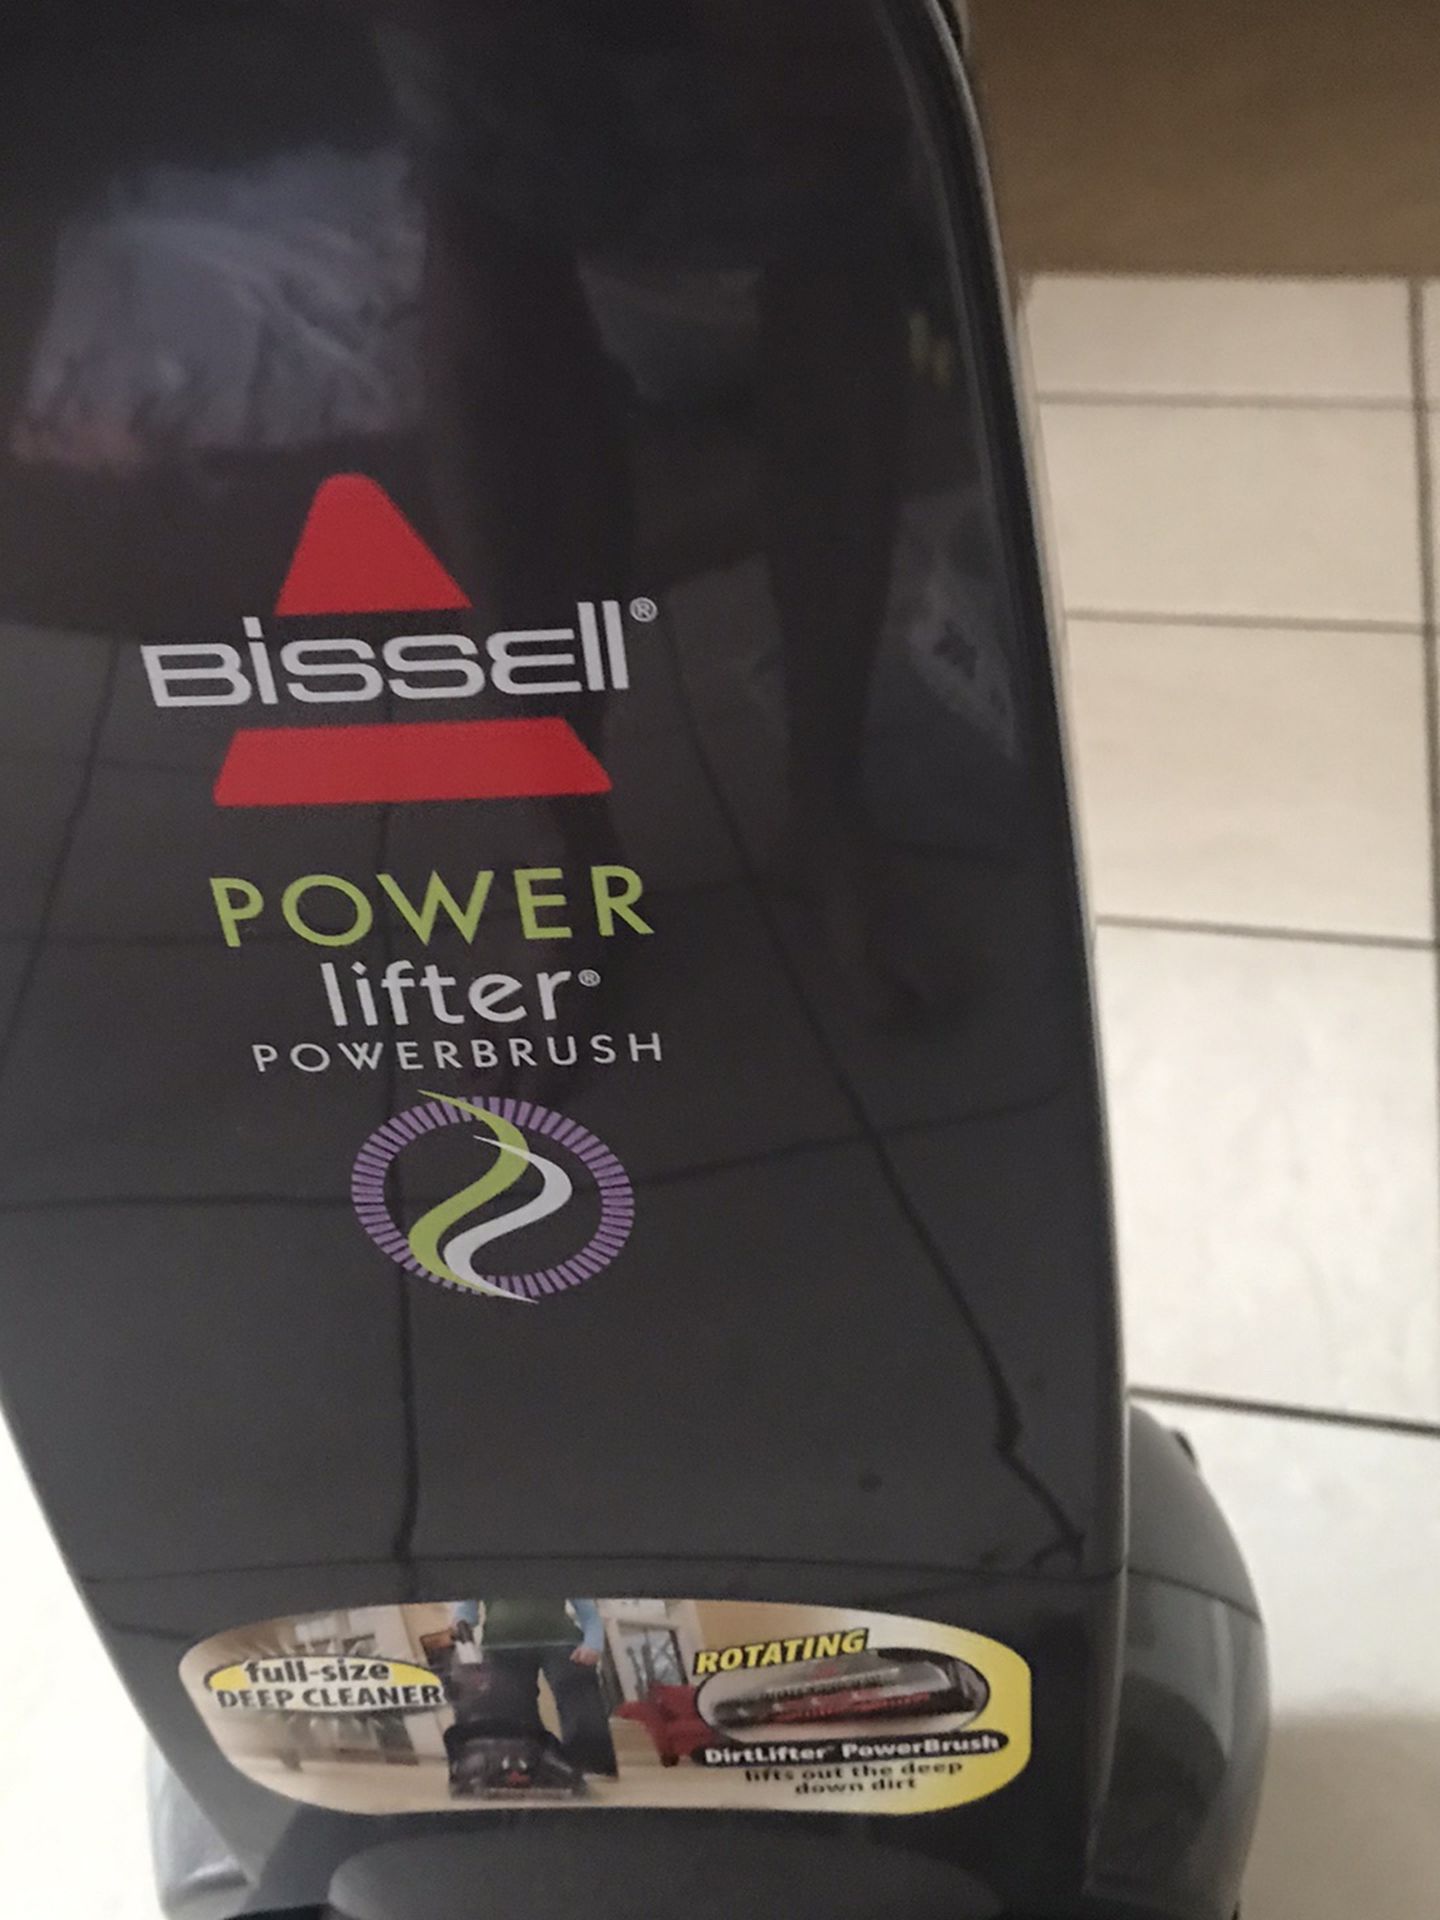 Bissell Power Lifter Carpet Cleaner